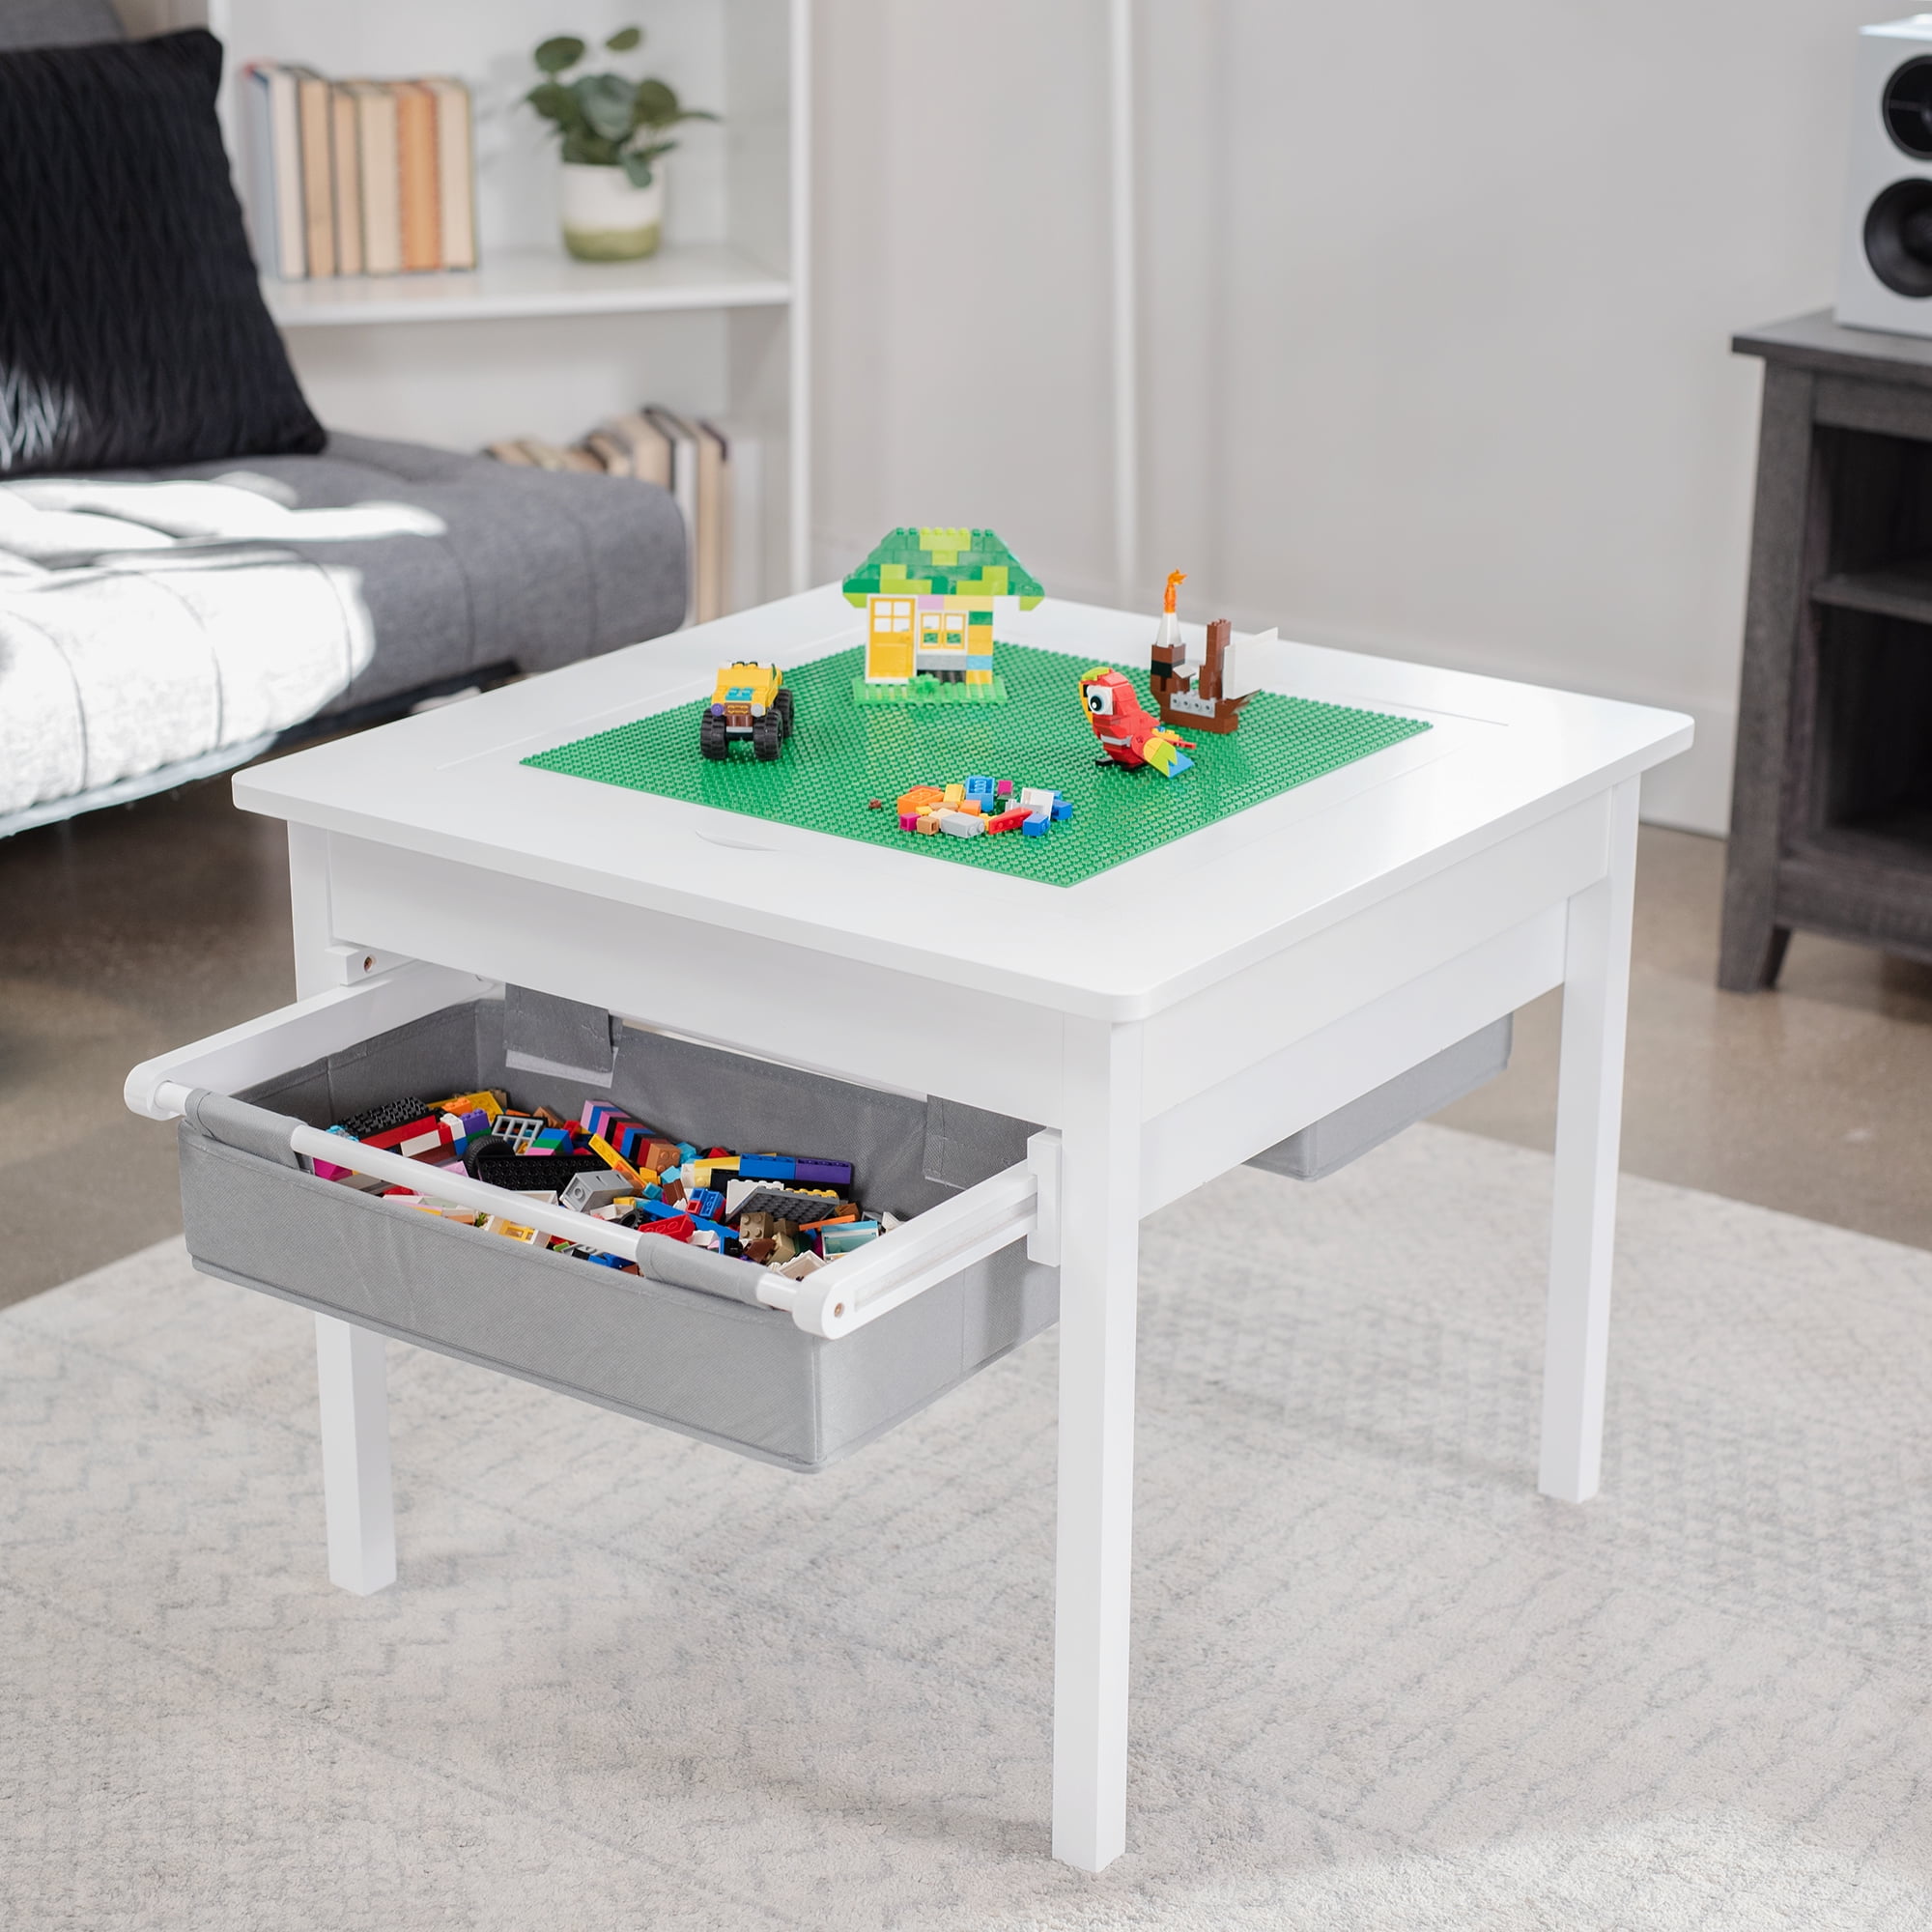 Costco LEGO Table Offers Smart Storage and Saves Your Feet- Motherly